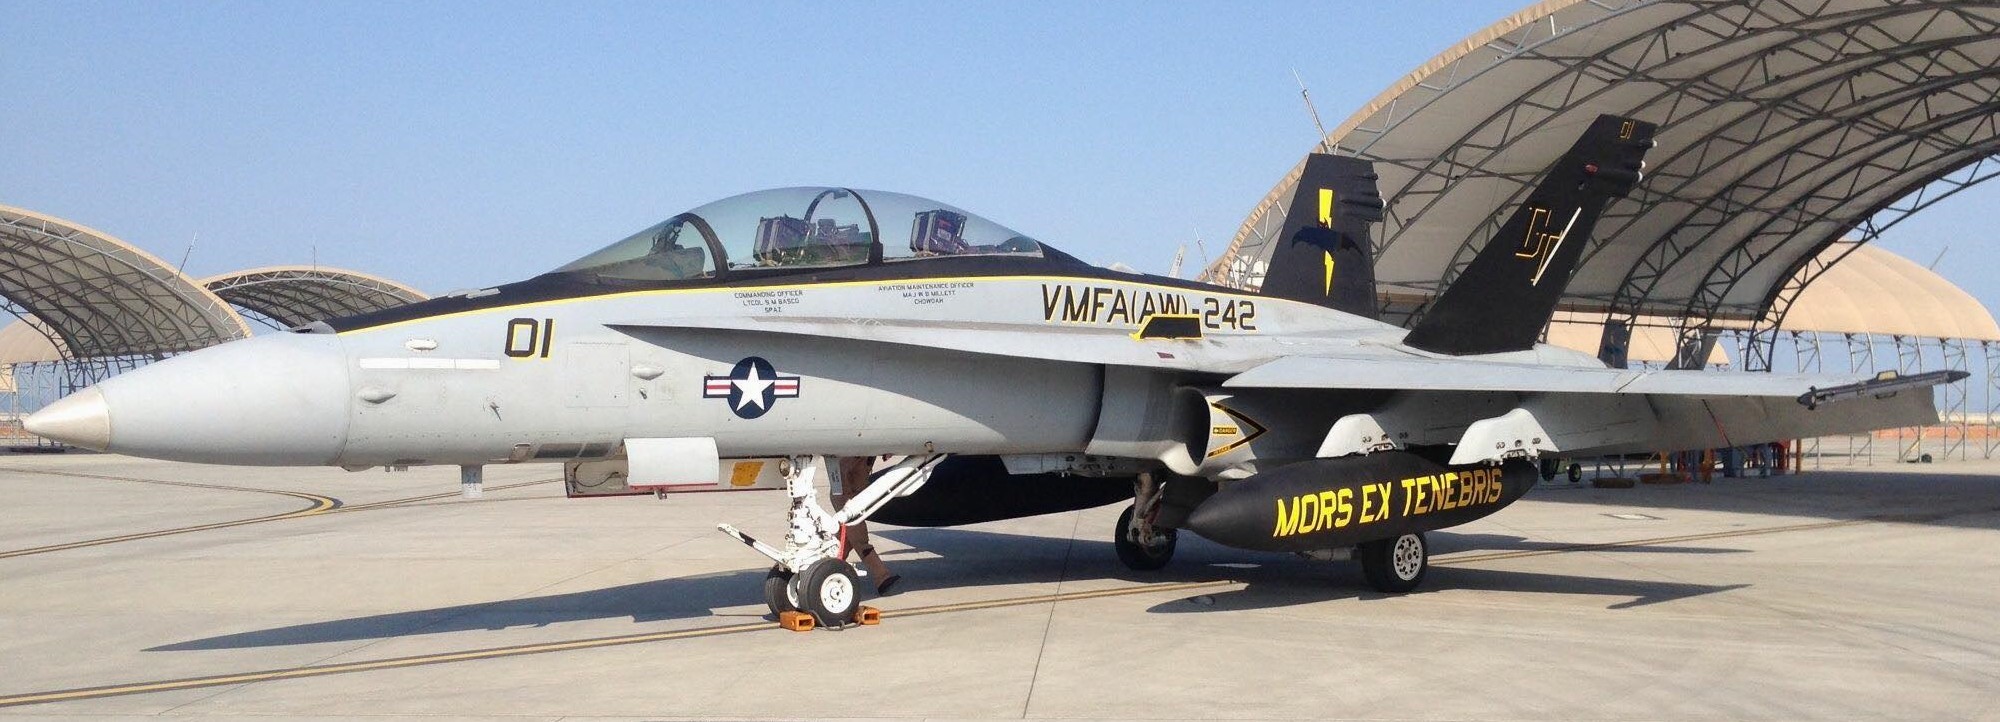 vmfa(aw)-242 bats marine all-weather fighter attack squadron usmc f/a-18d hornet 60